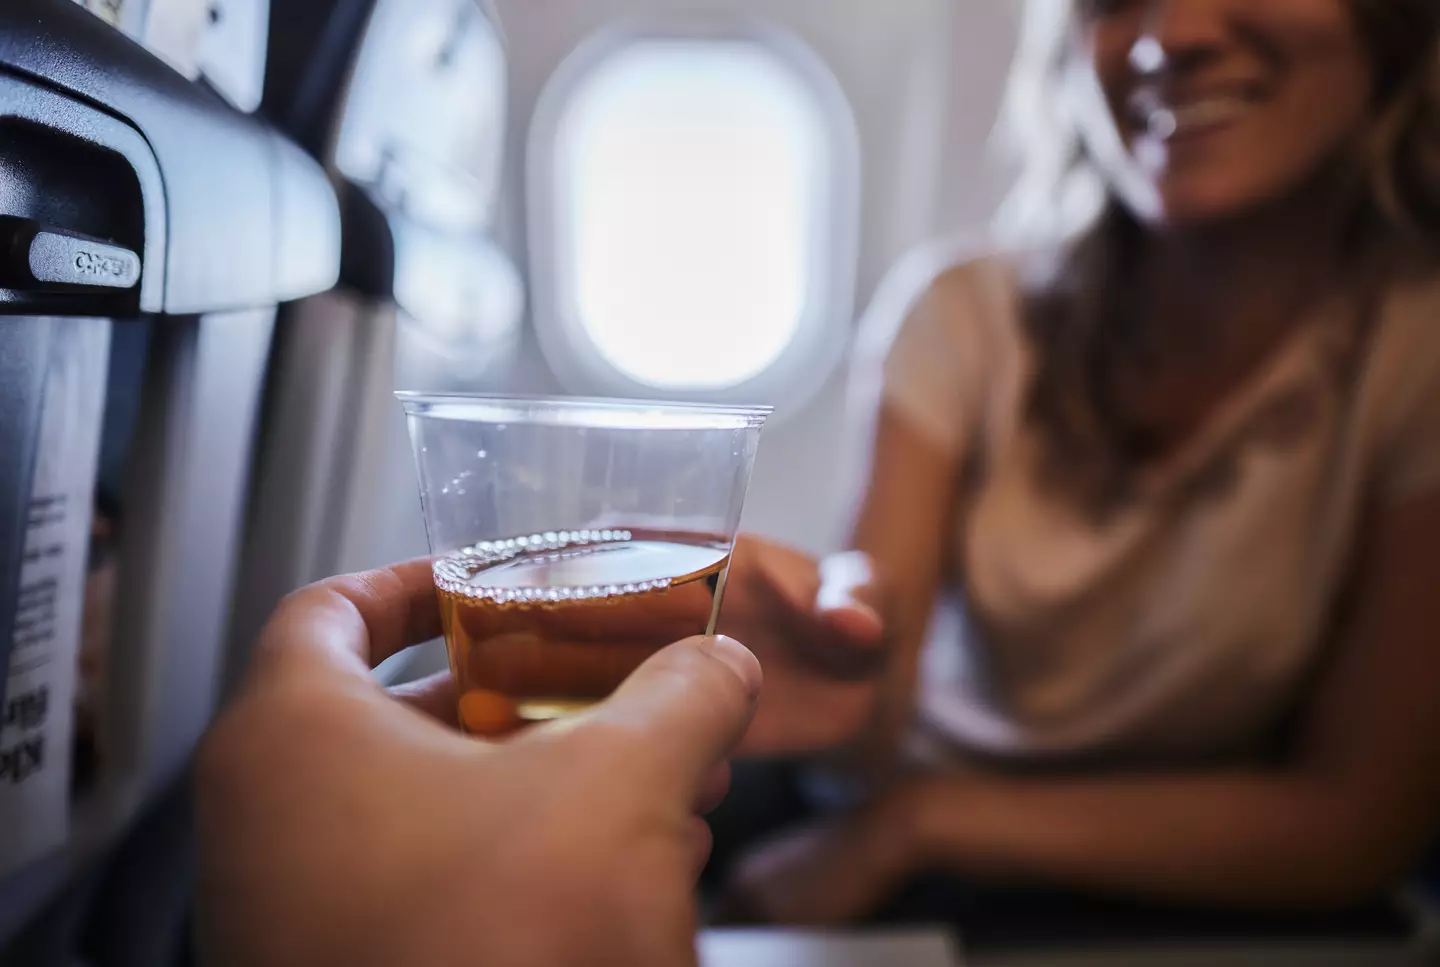 She says to never get drunk while on a plane, which may come as a shock to many. (Getty Stock Image)